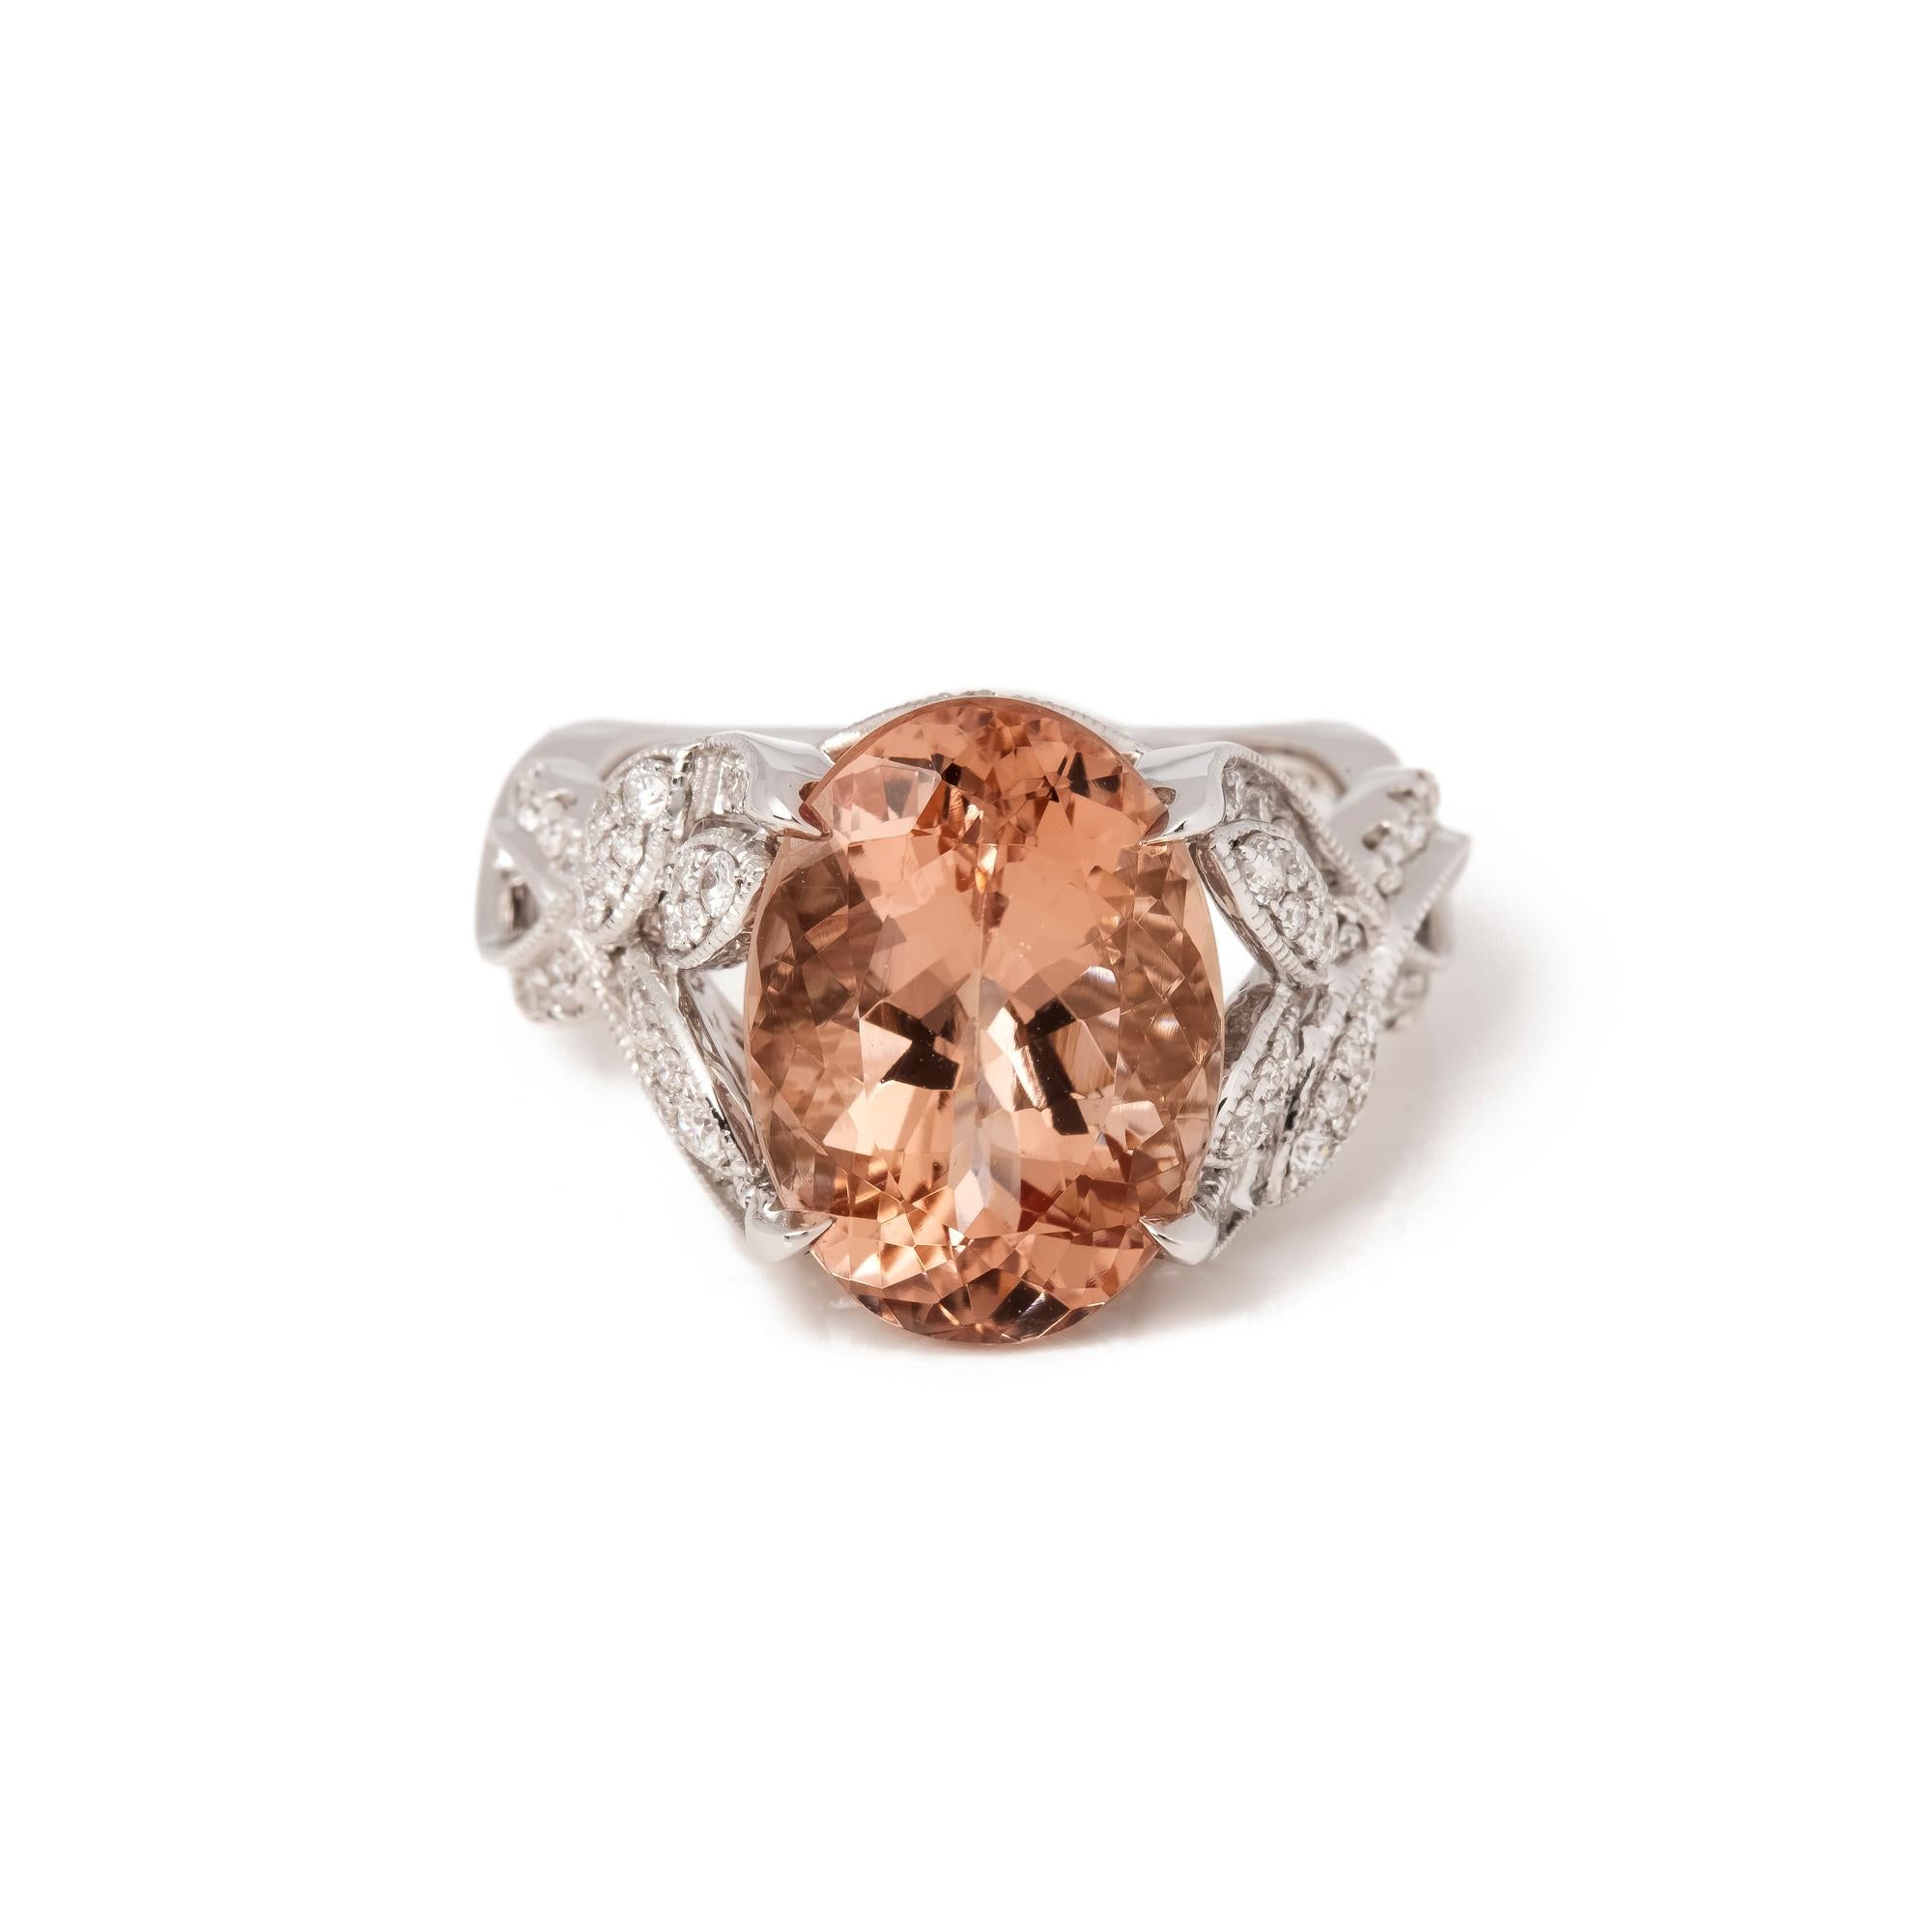 This ring is from the private collection of gemstone jewellery individually designed by David Jerome. It features an oval cut morganite set with diamonds. Accompanied by an IGITL gem certificate. UK ring size N. EU ring size 54. US ring size 7. 